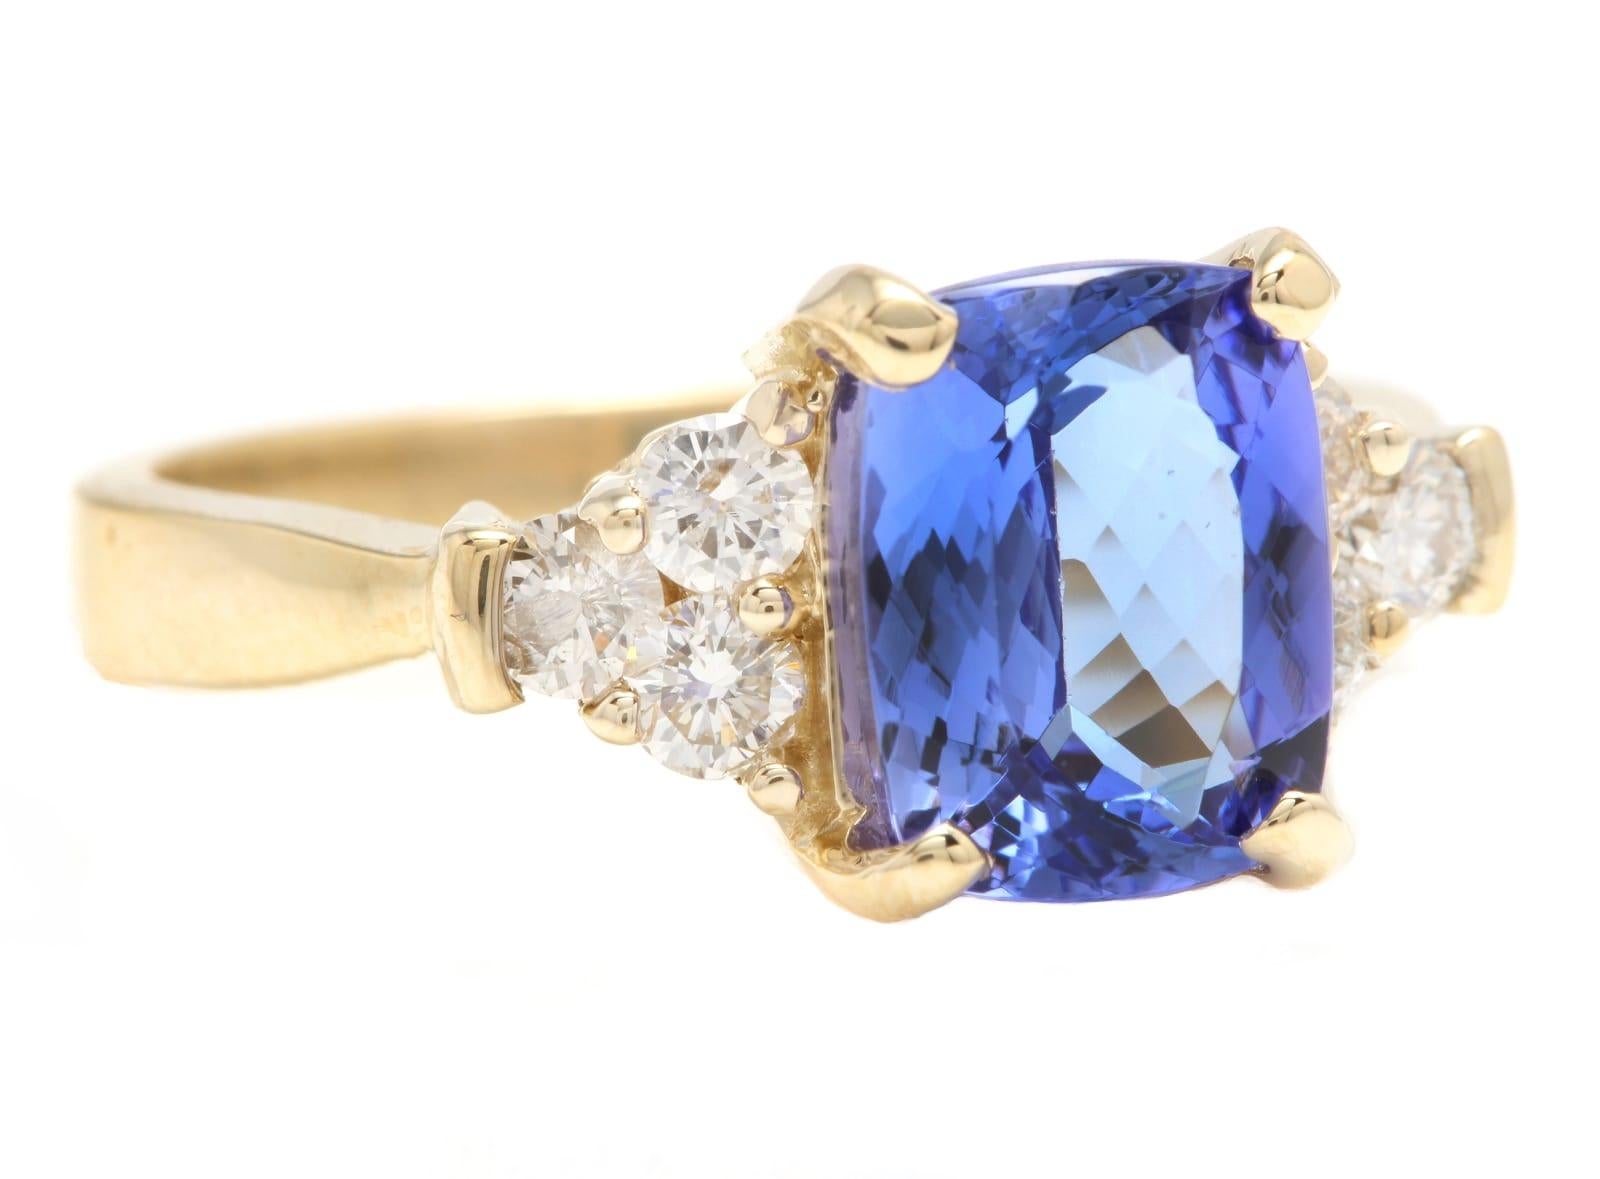 3.50 Carats Natural Very Nice Looking Tanzanite and Diamond 14K Solid Yellow Gold Ring

Suggested Replacement Value:  $5,800.00

Total Natural Cushion Tanzanite Weight is: Approx. 3.25 Carats 

Tanzanite Measures: Approx. 9.00 x 7.00mm

Natural